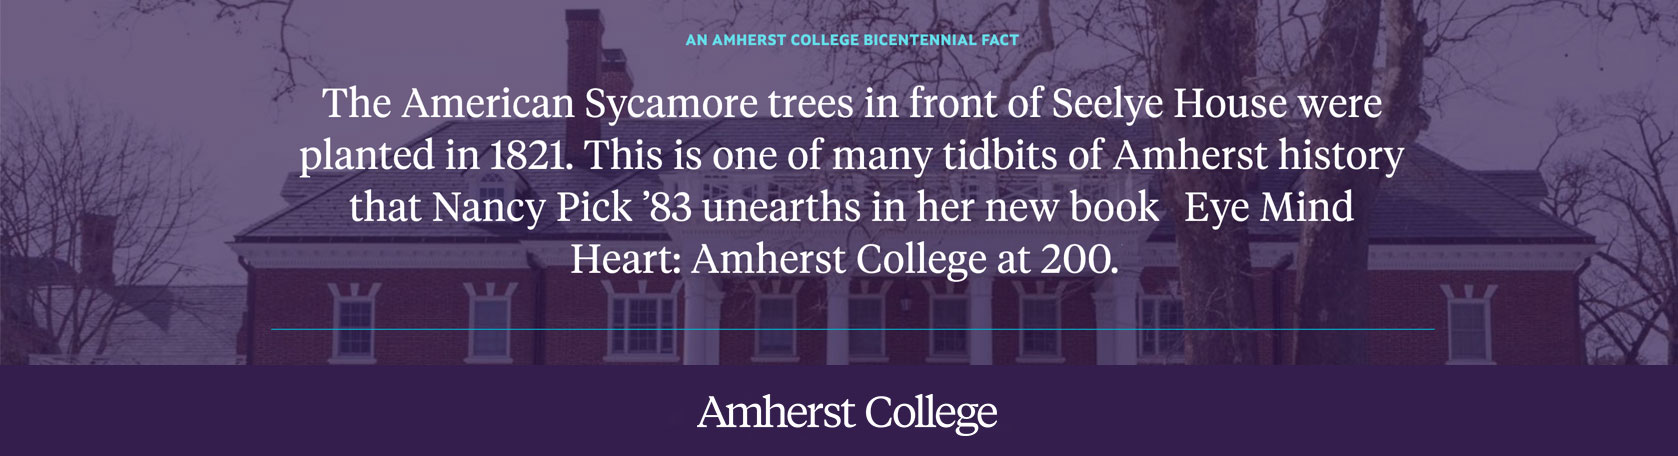 Bicentennial Fact: the Sycamores in front of Seelye House were planted in 1821